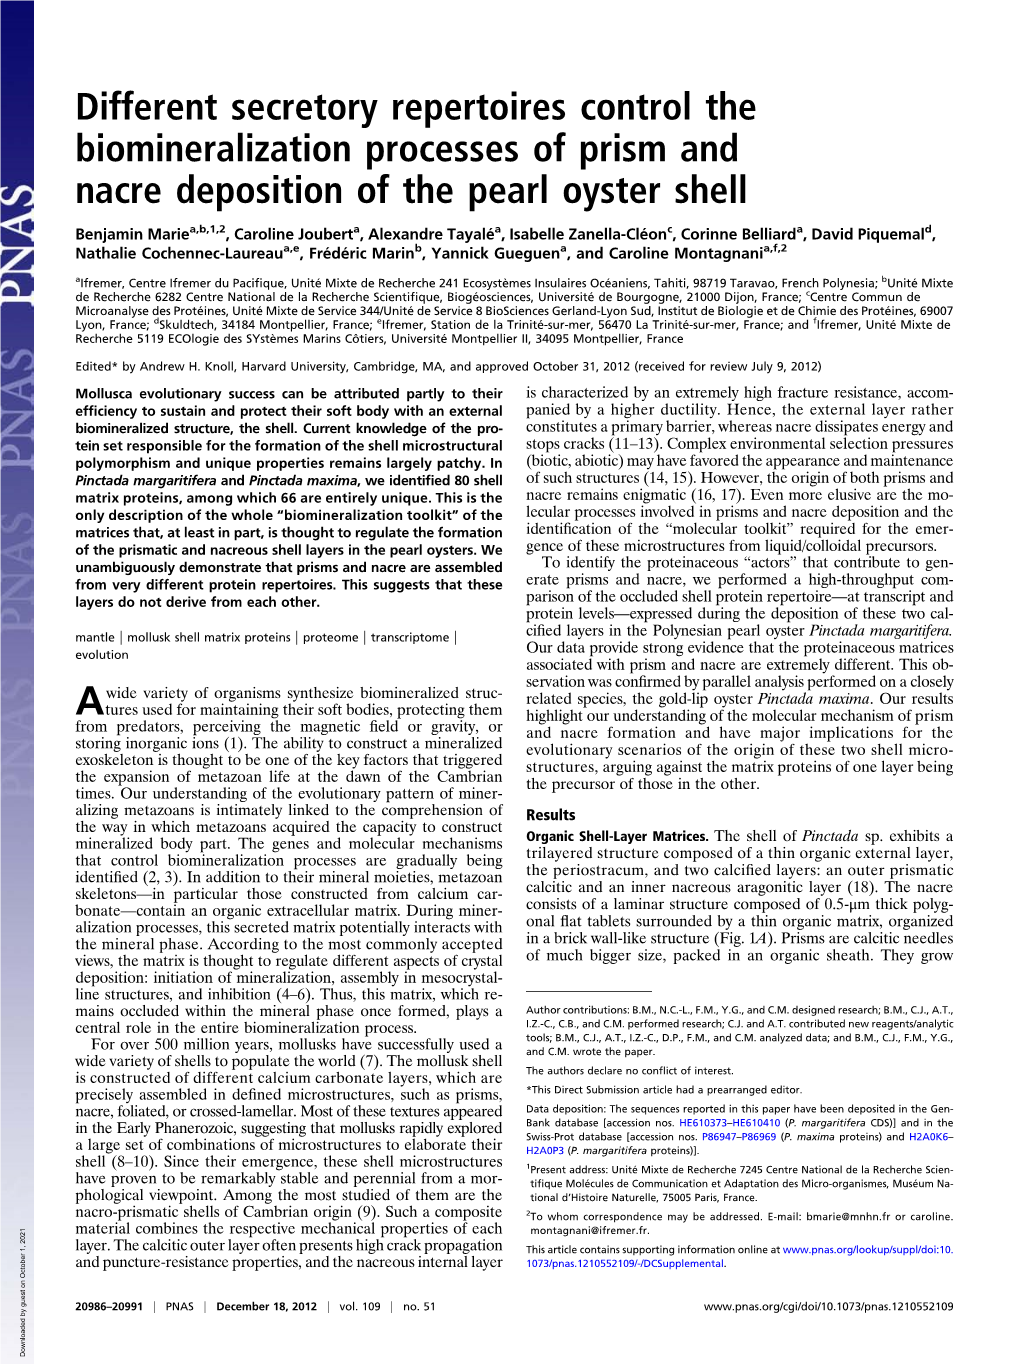 Different Secretory Repertoires Control the Biomineralization Processes of Prism and Nacre Deposition of the Pearl Oyster Shell